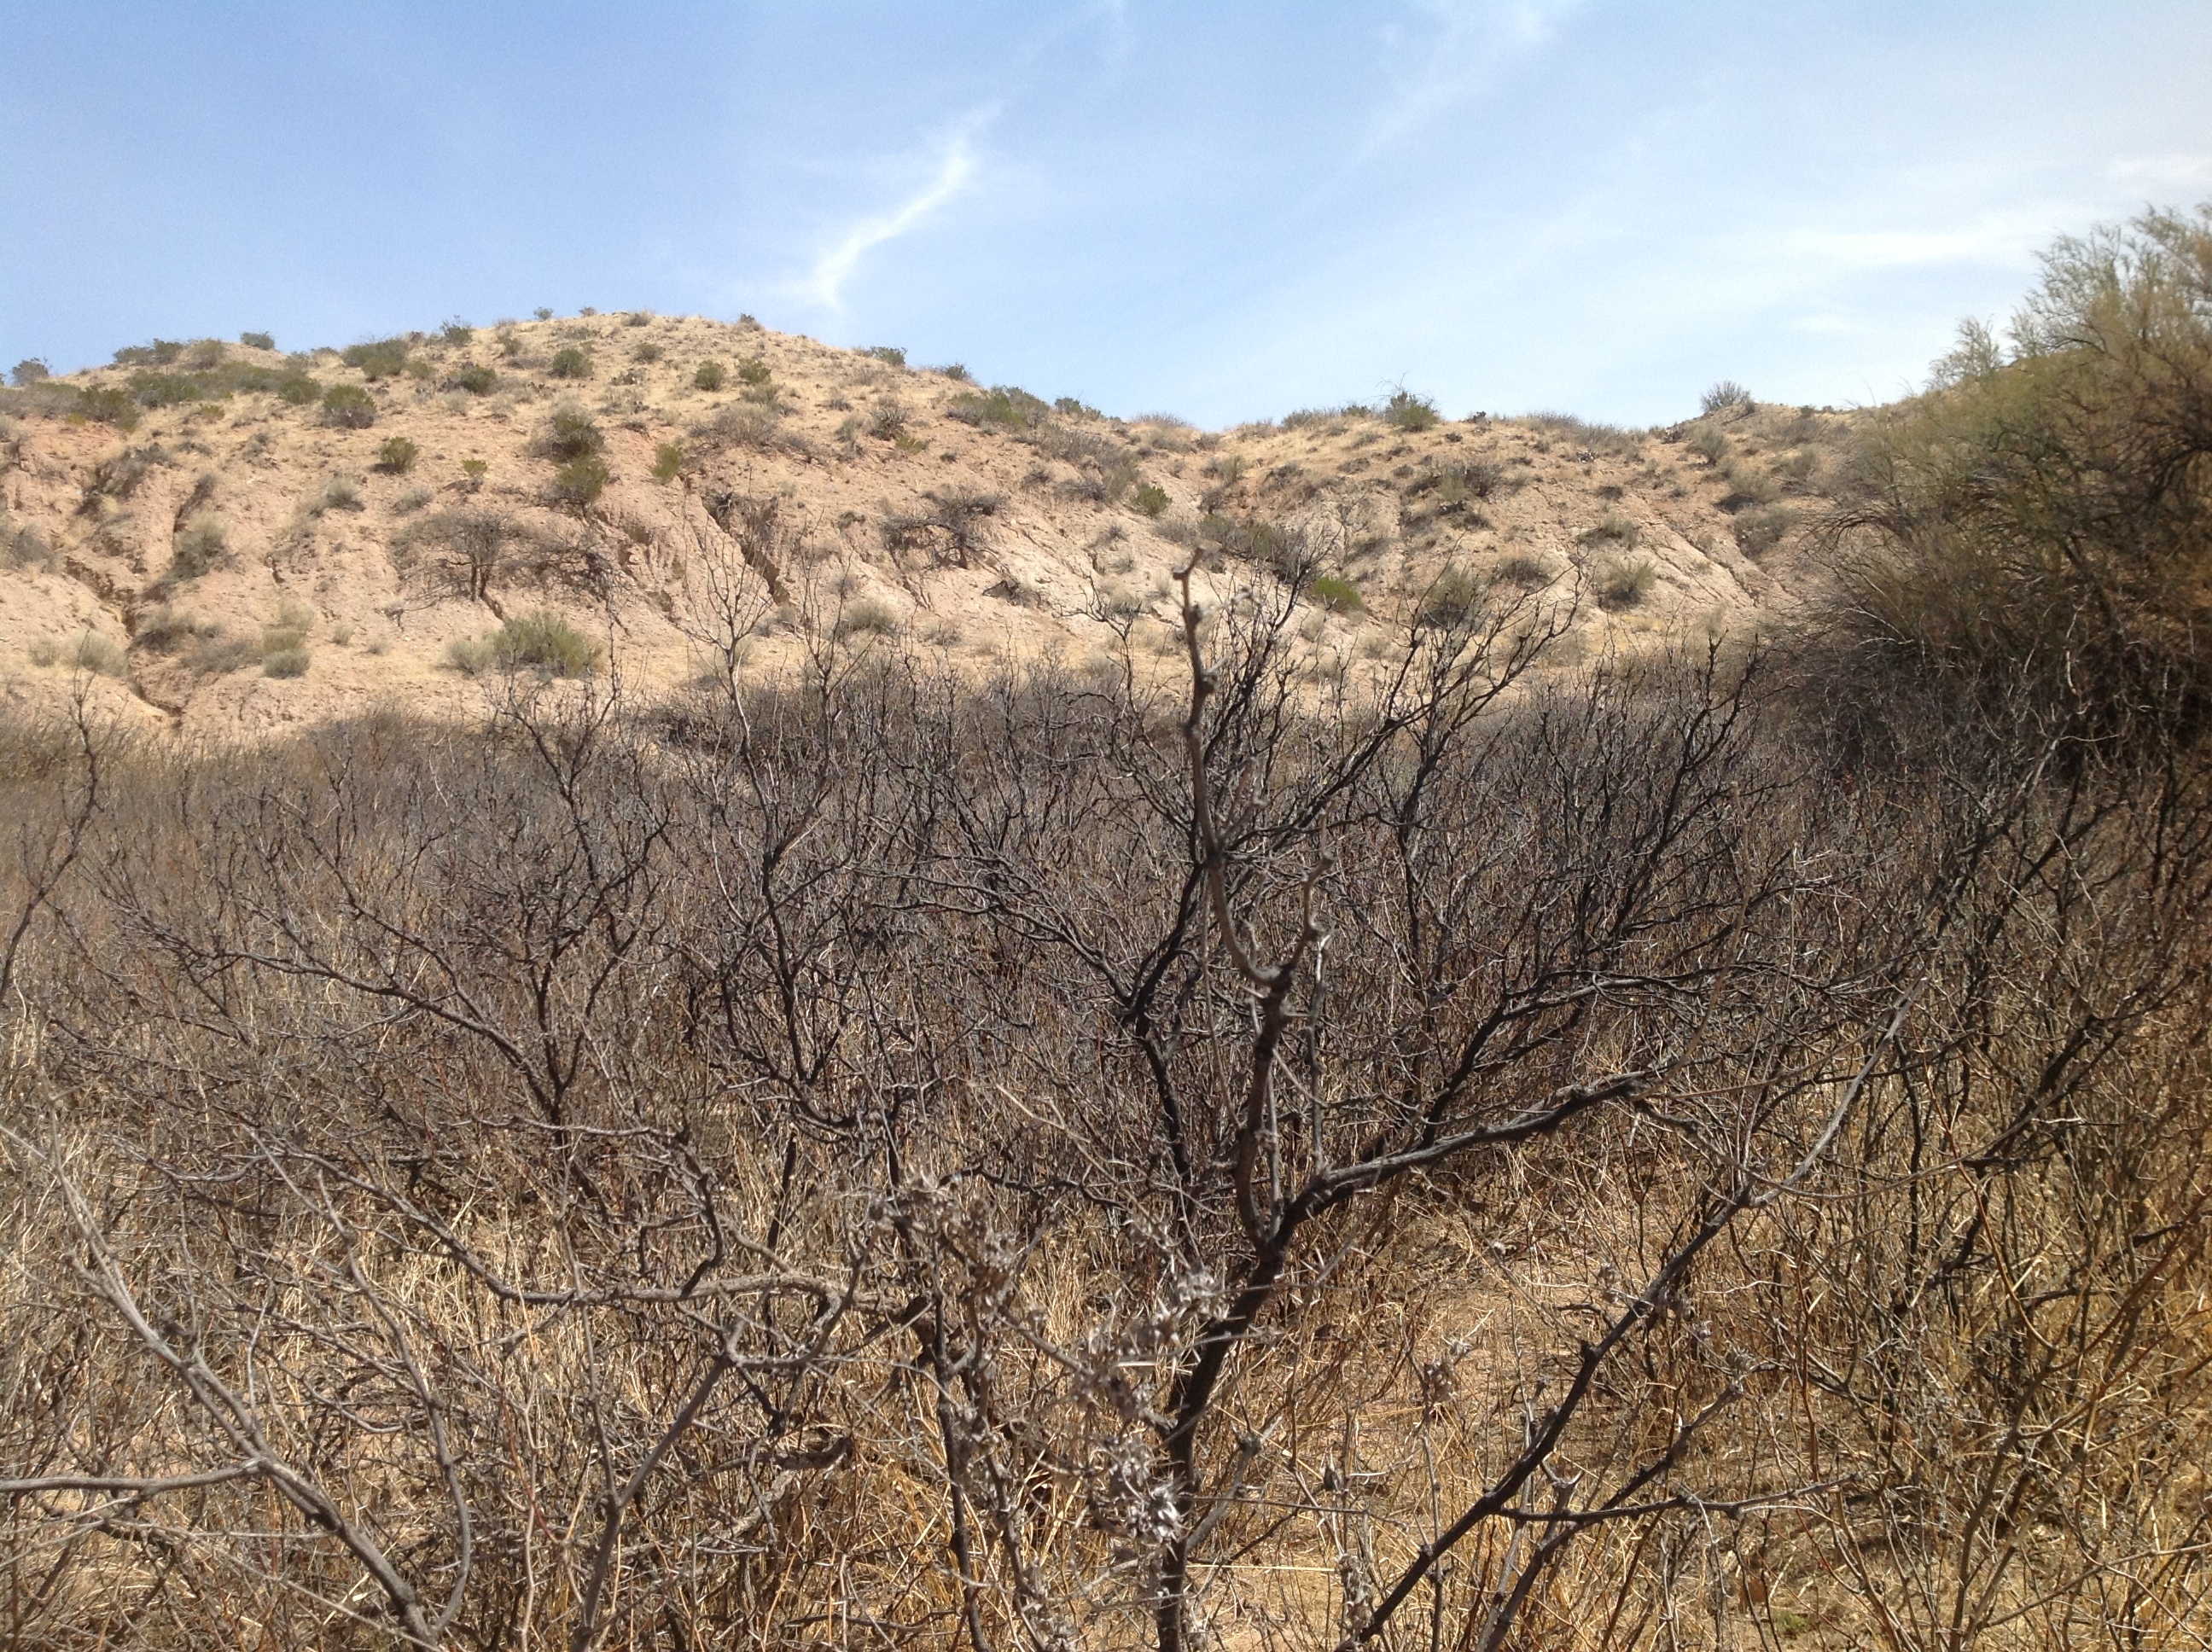 Dry vegetation meets a barron hillside at Bosque del Apache National Wildlife Refuge at Point of Lands near Socorro, NM